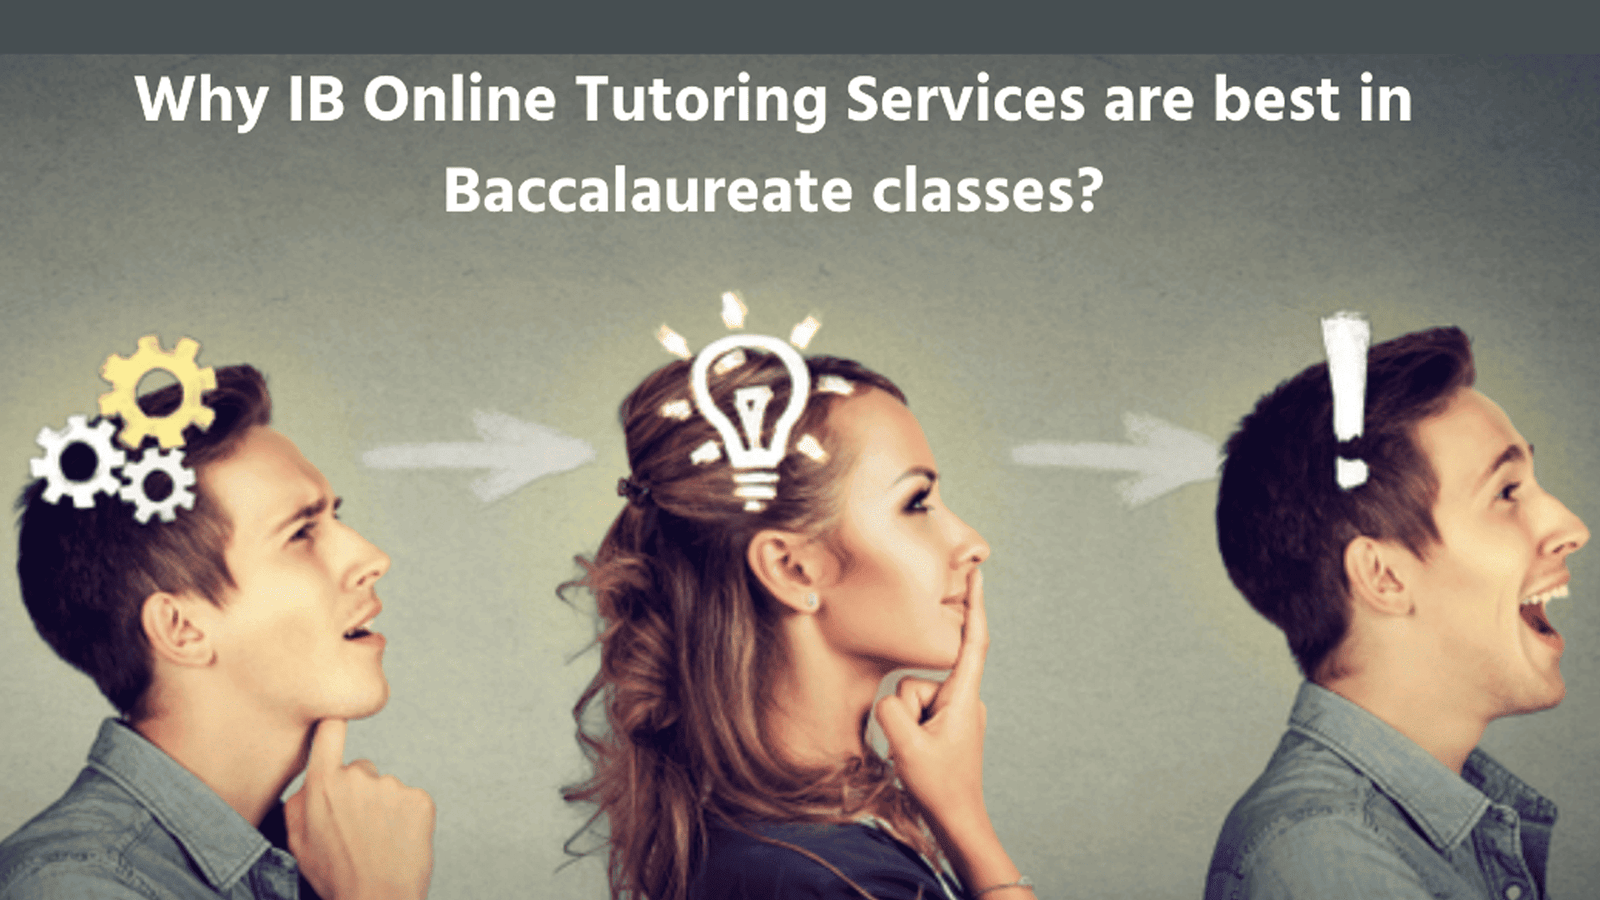 Why IB Online Tutoring Services are best in Baccalaureate classes?